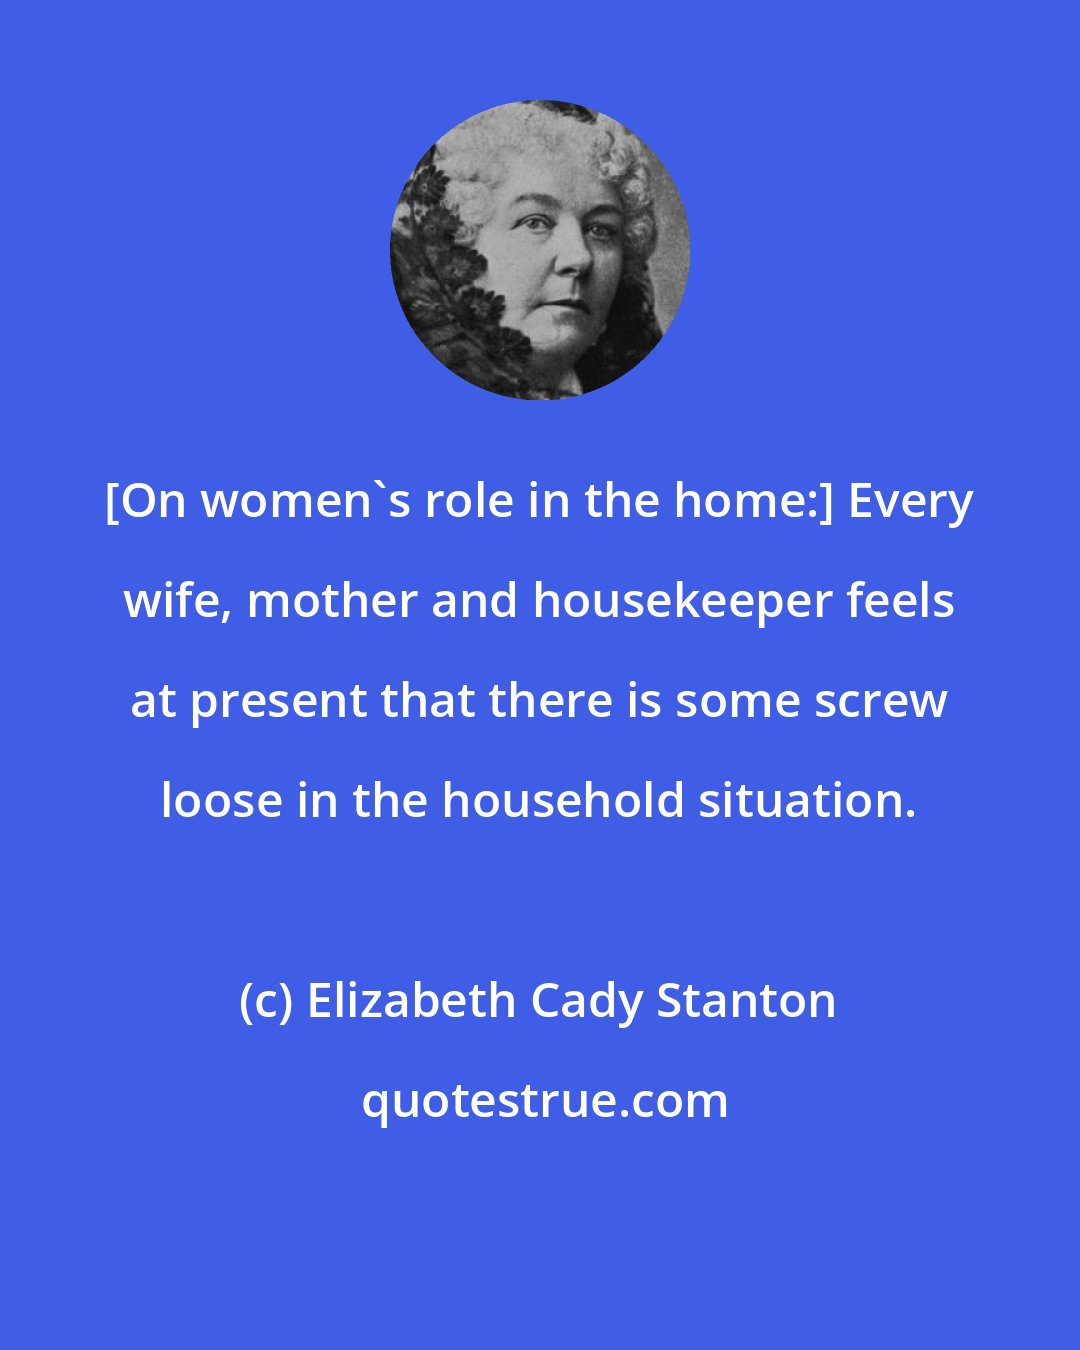 Elizabeth Cady Stanton: [On women's role in the home:] Every wife, mother and housekeeper feels at present that there is some screw loose in the household situation.